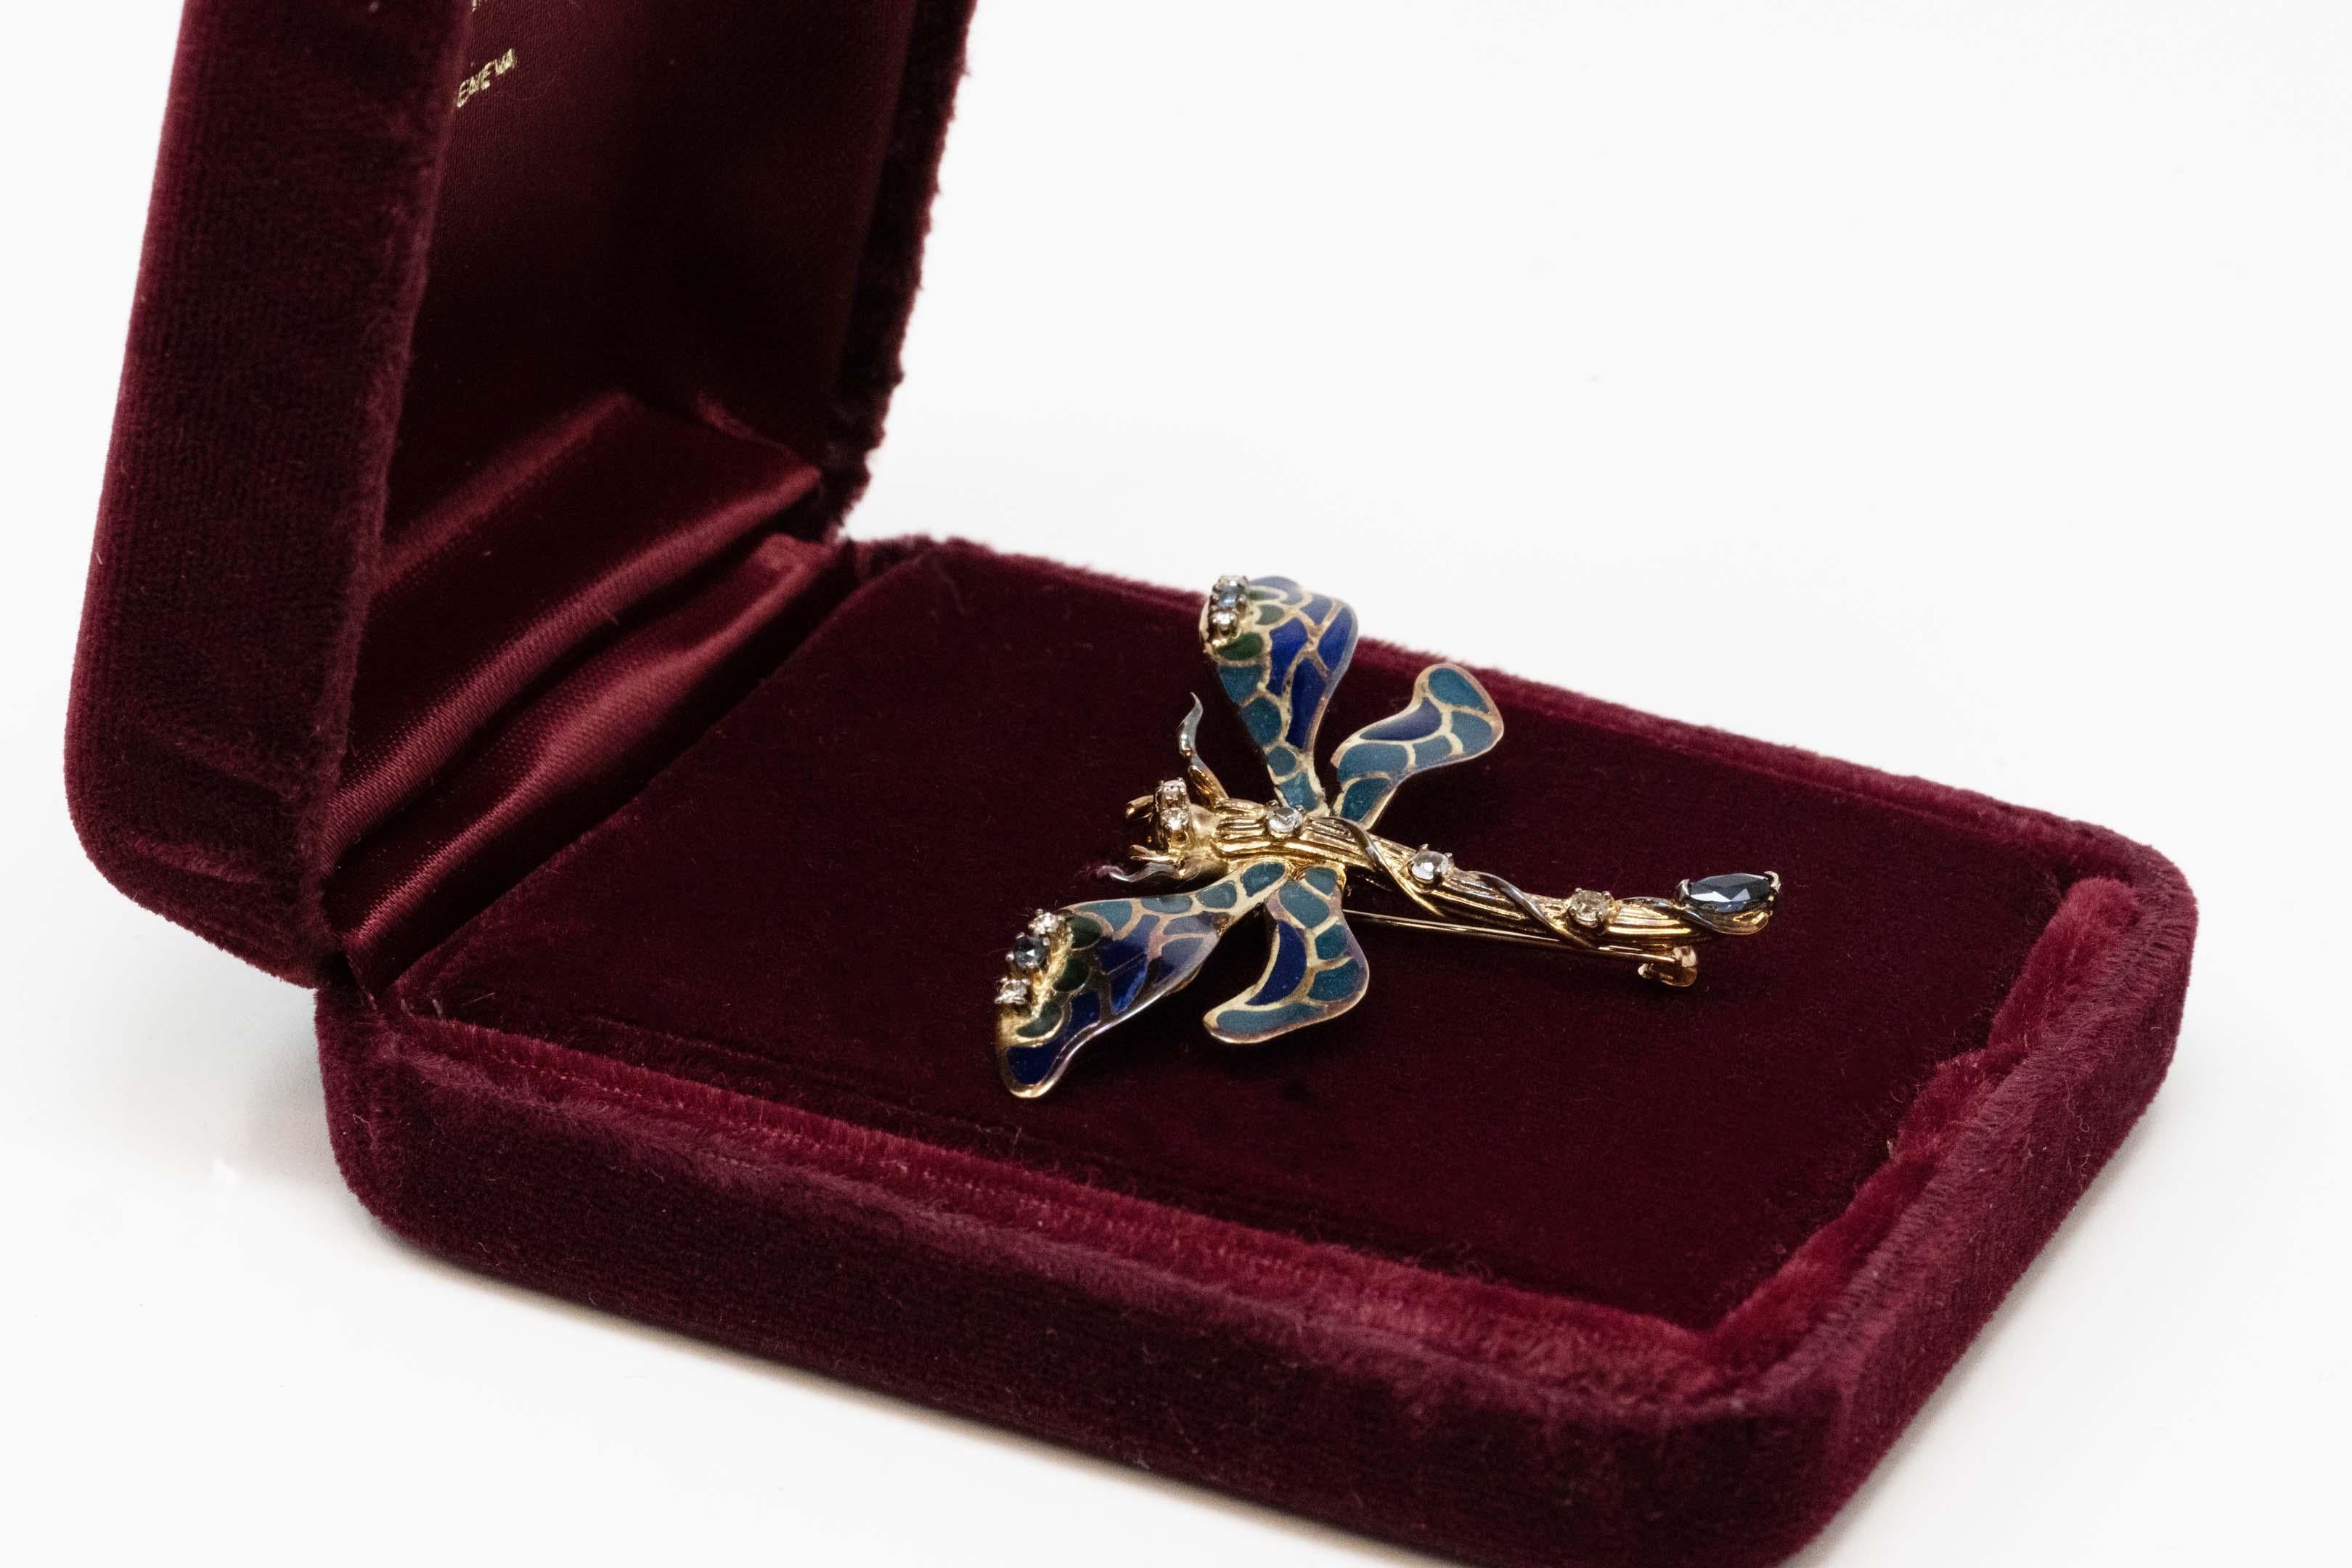 Franklin Mint House of Igor Karl Faberge 14k gold dragonfly brooch pin. Set with 6 diamonds , 3 sapphires and 3 aquamarines and intricate Plique a Jour work. Box included in excellent condition, measures 38 mm  long x 51 mm wide.